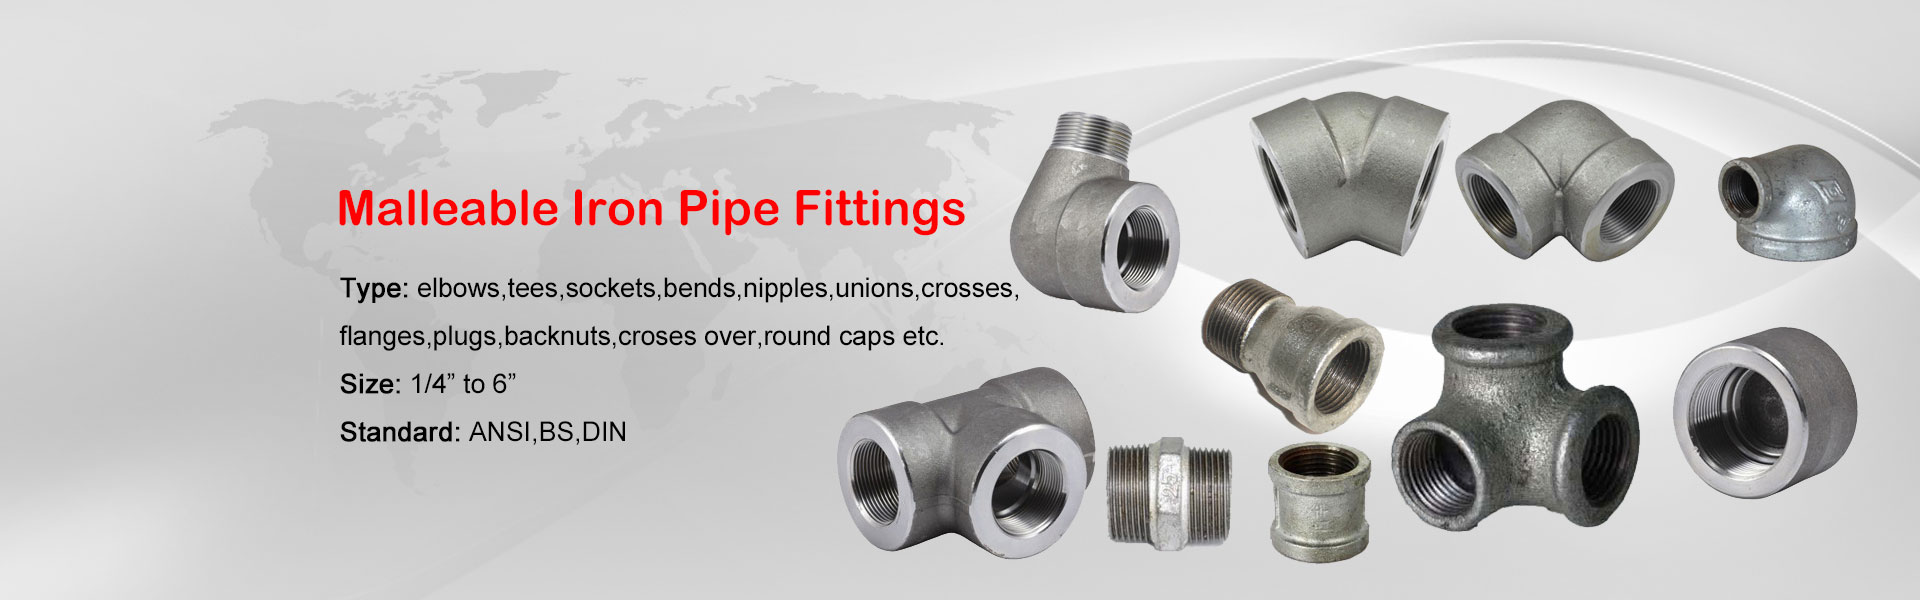 Malleable-Iron-Pipe-Fittings